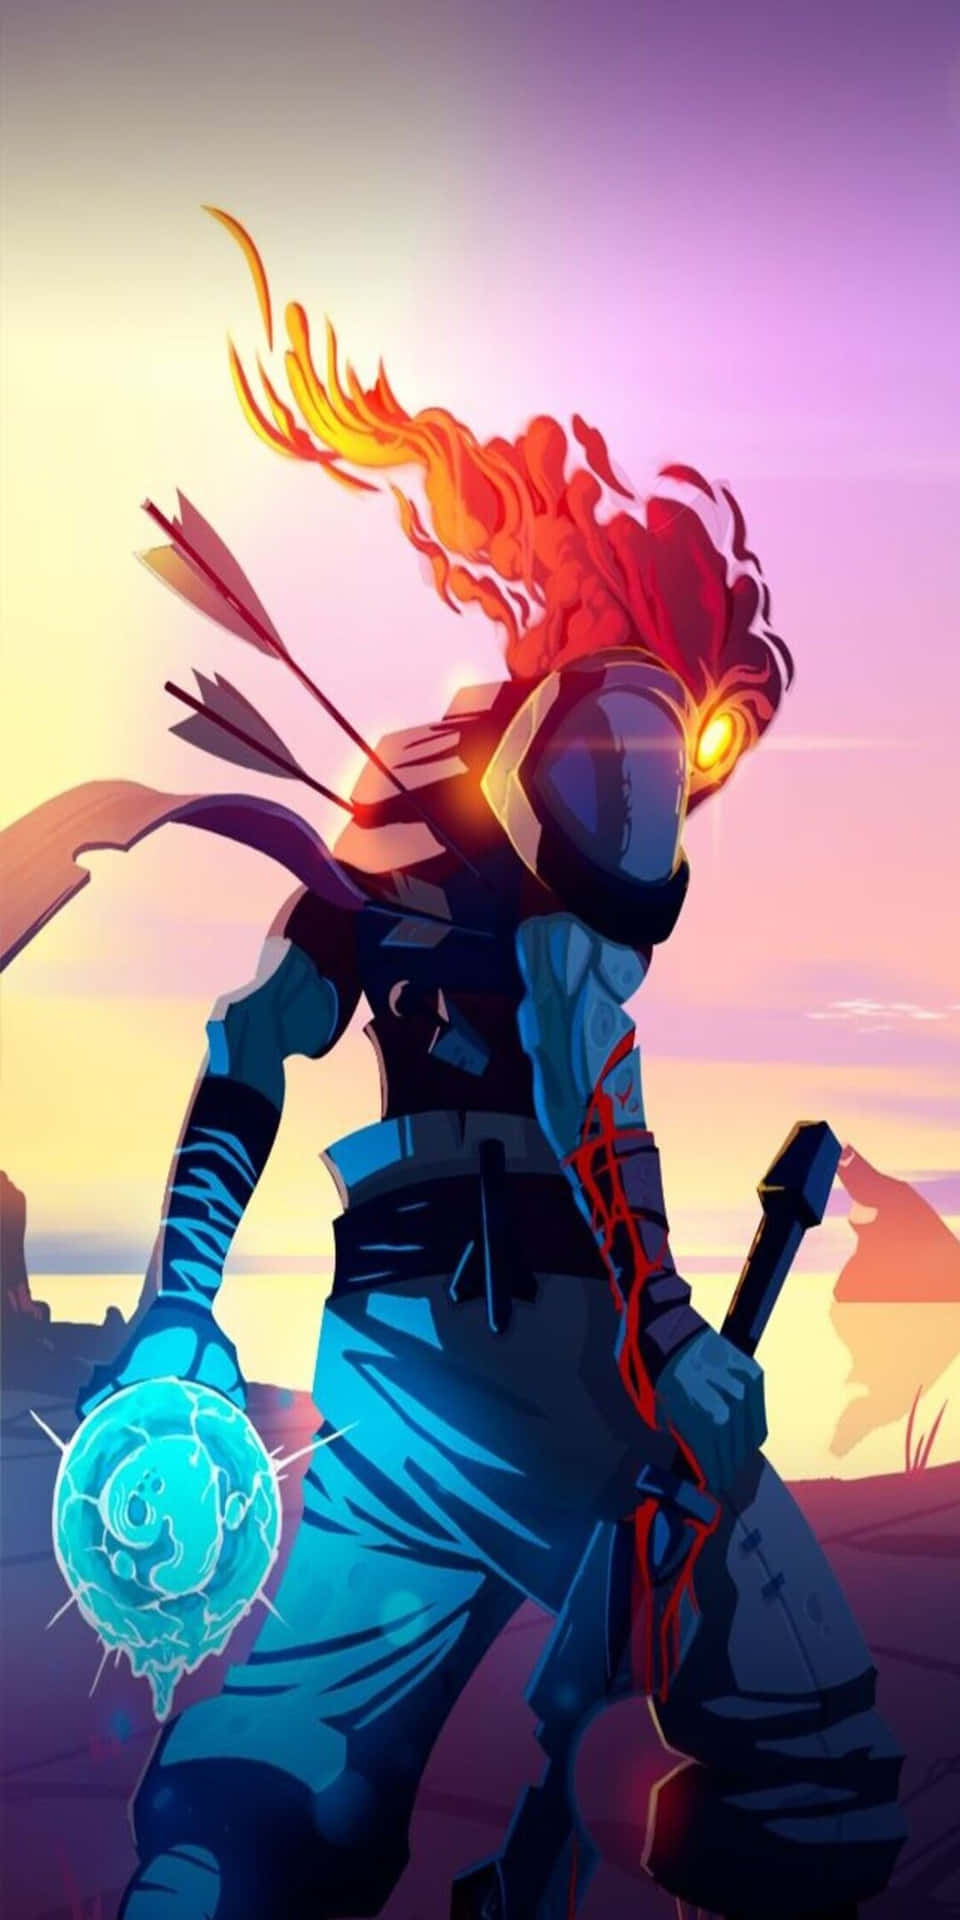 A Character With Red Hair And A Sword In His Hands